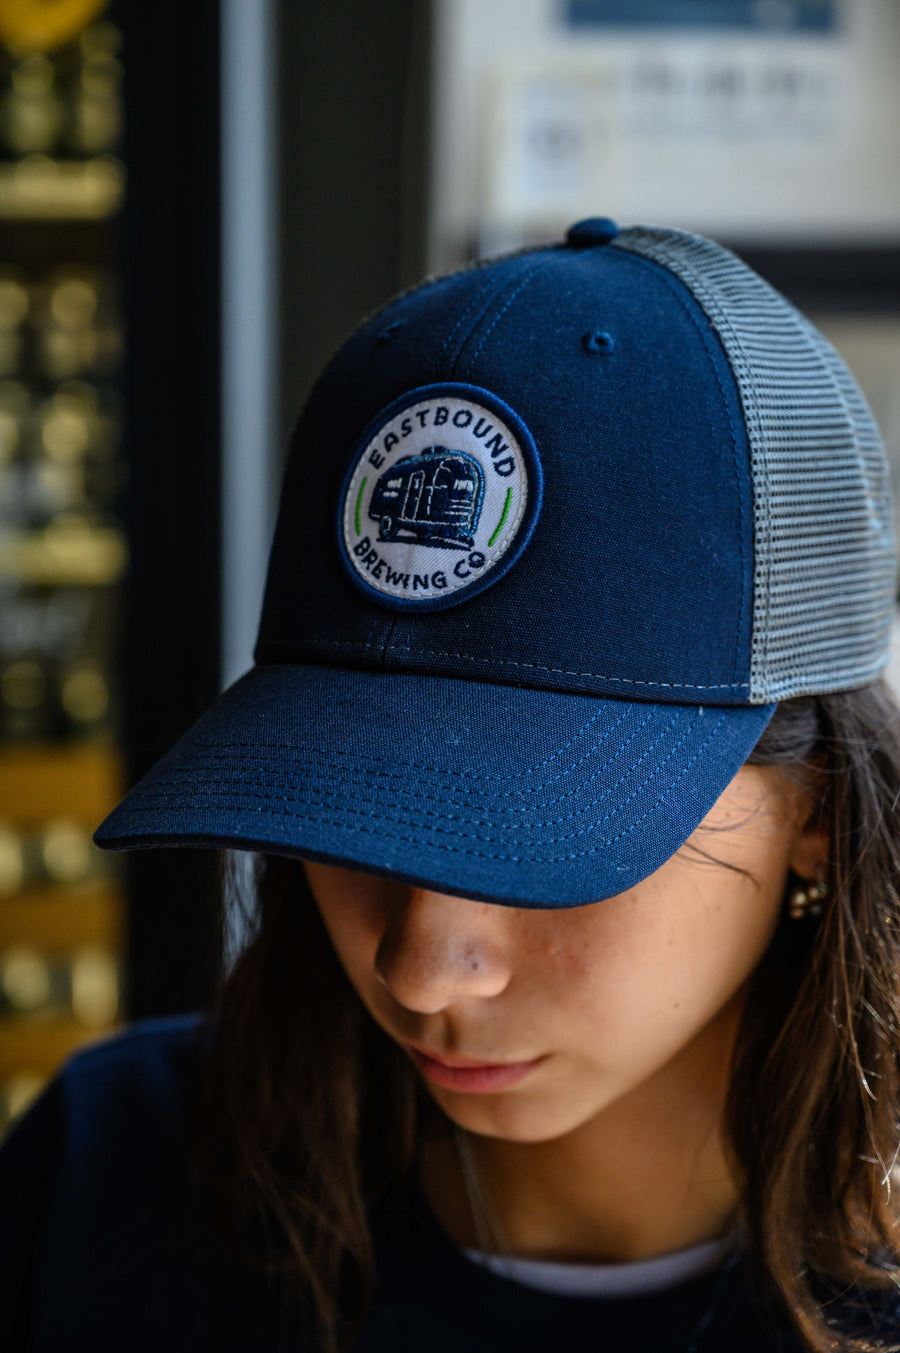 Eastbound Brewing Company classic cap with mesh backing